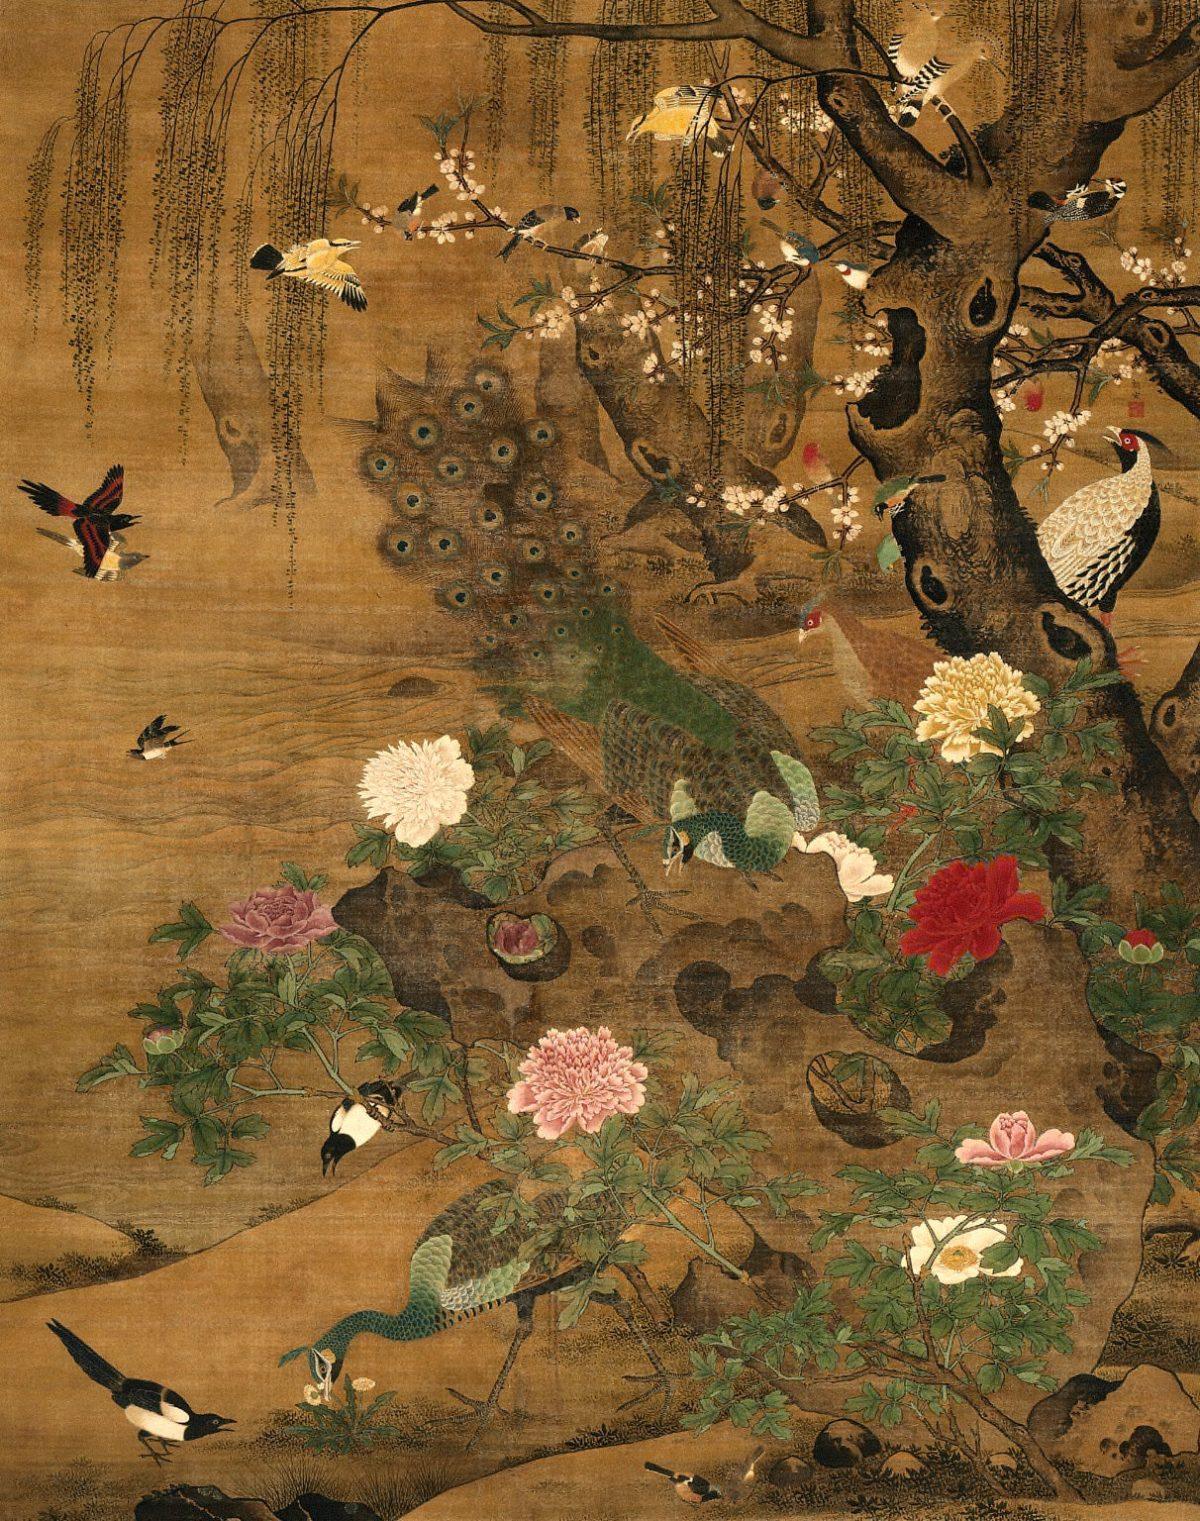 “Hundreds of Birds Admiring the Peacocks,” late 1400s–early 1500, by Yin Hong (active 1487–1505). Ink and color on silk hanging scroll, 94.4 inches by 76.9 inches. (The Cleveland Museum of Art)